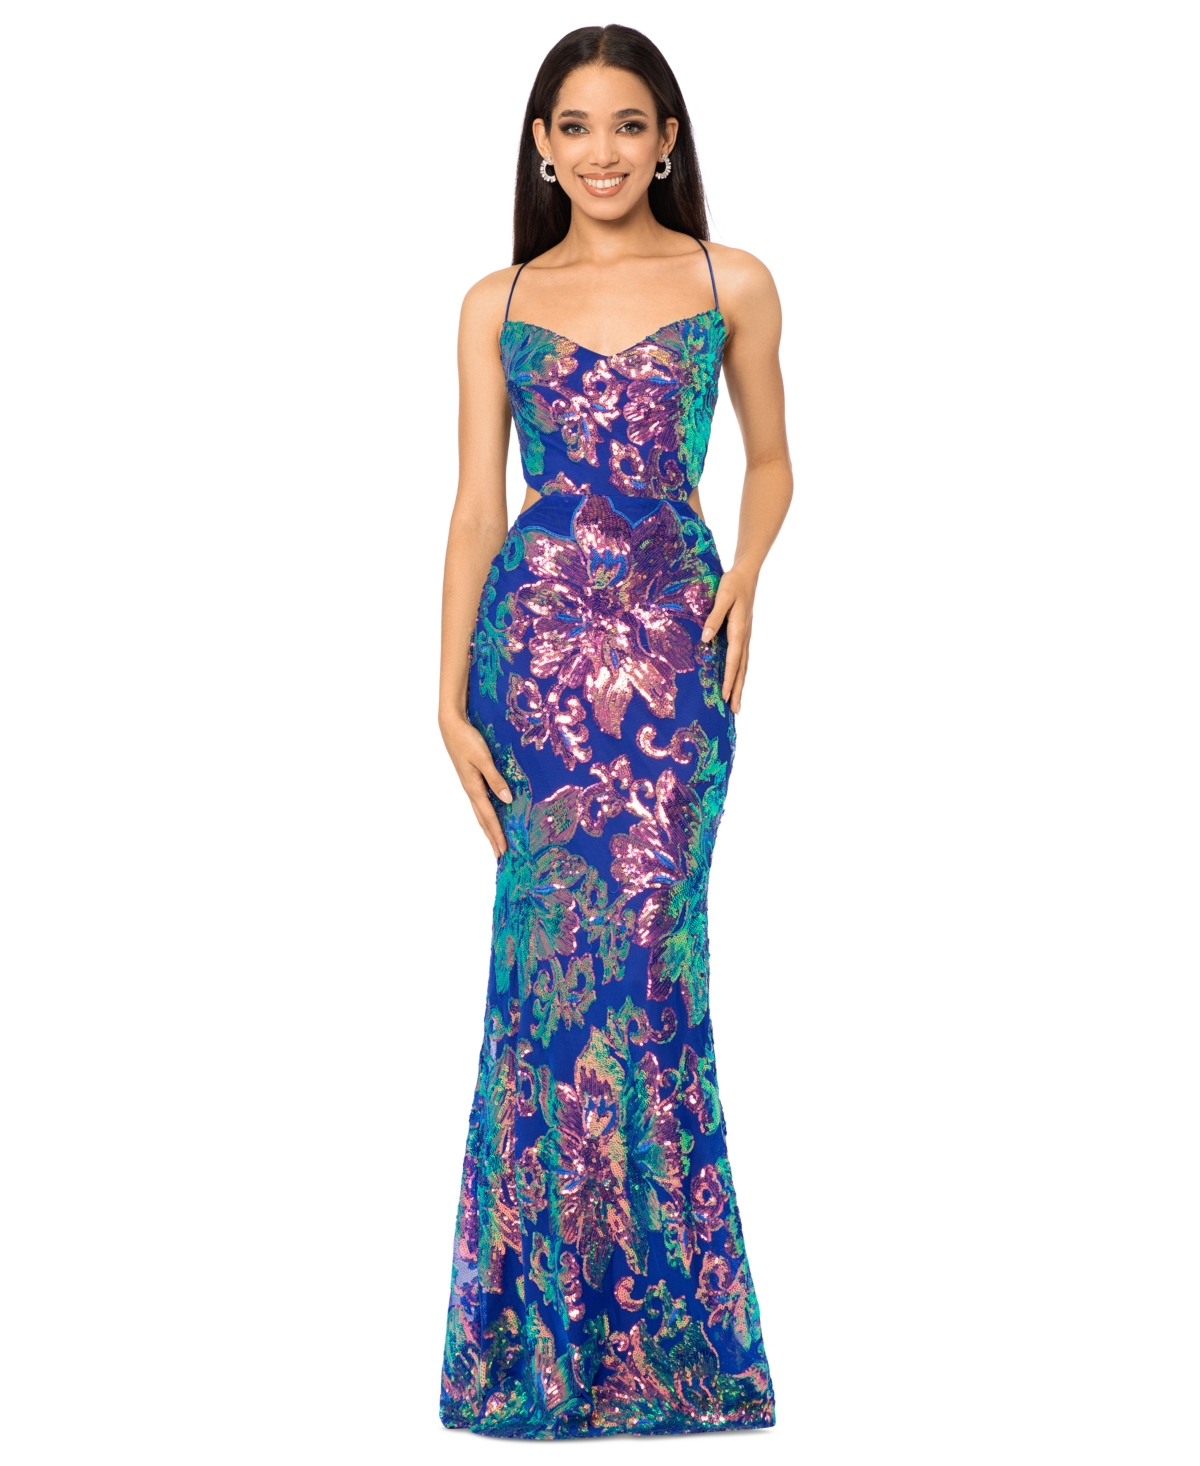 Blondie Nites Juniors' Strappy-Back Sequined Evening Gown